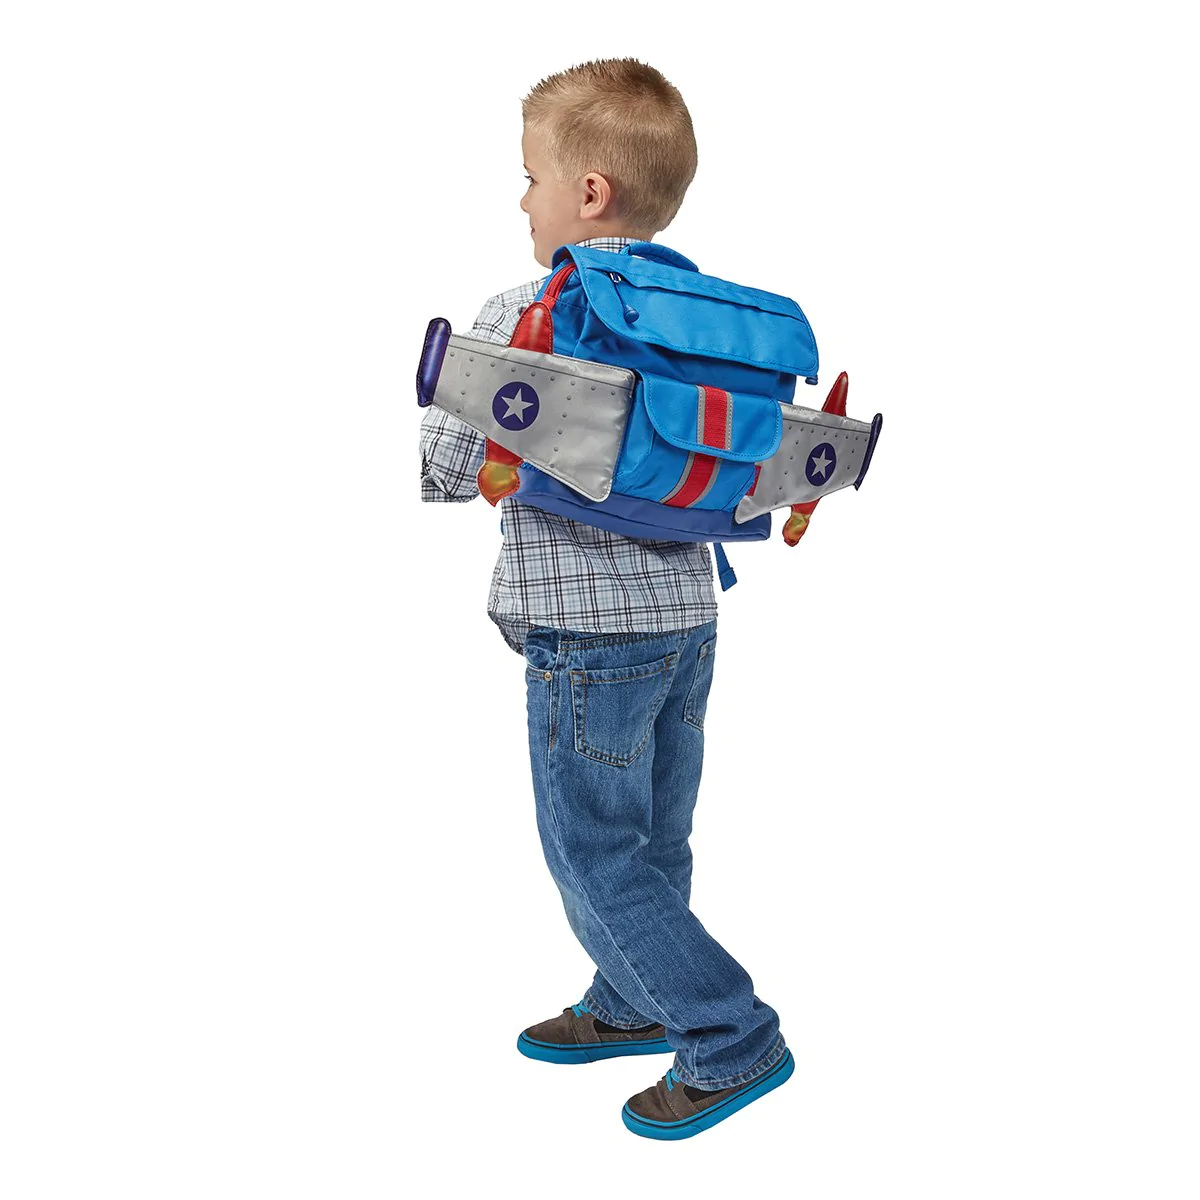 non toxic backpack for little boy from bixbee